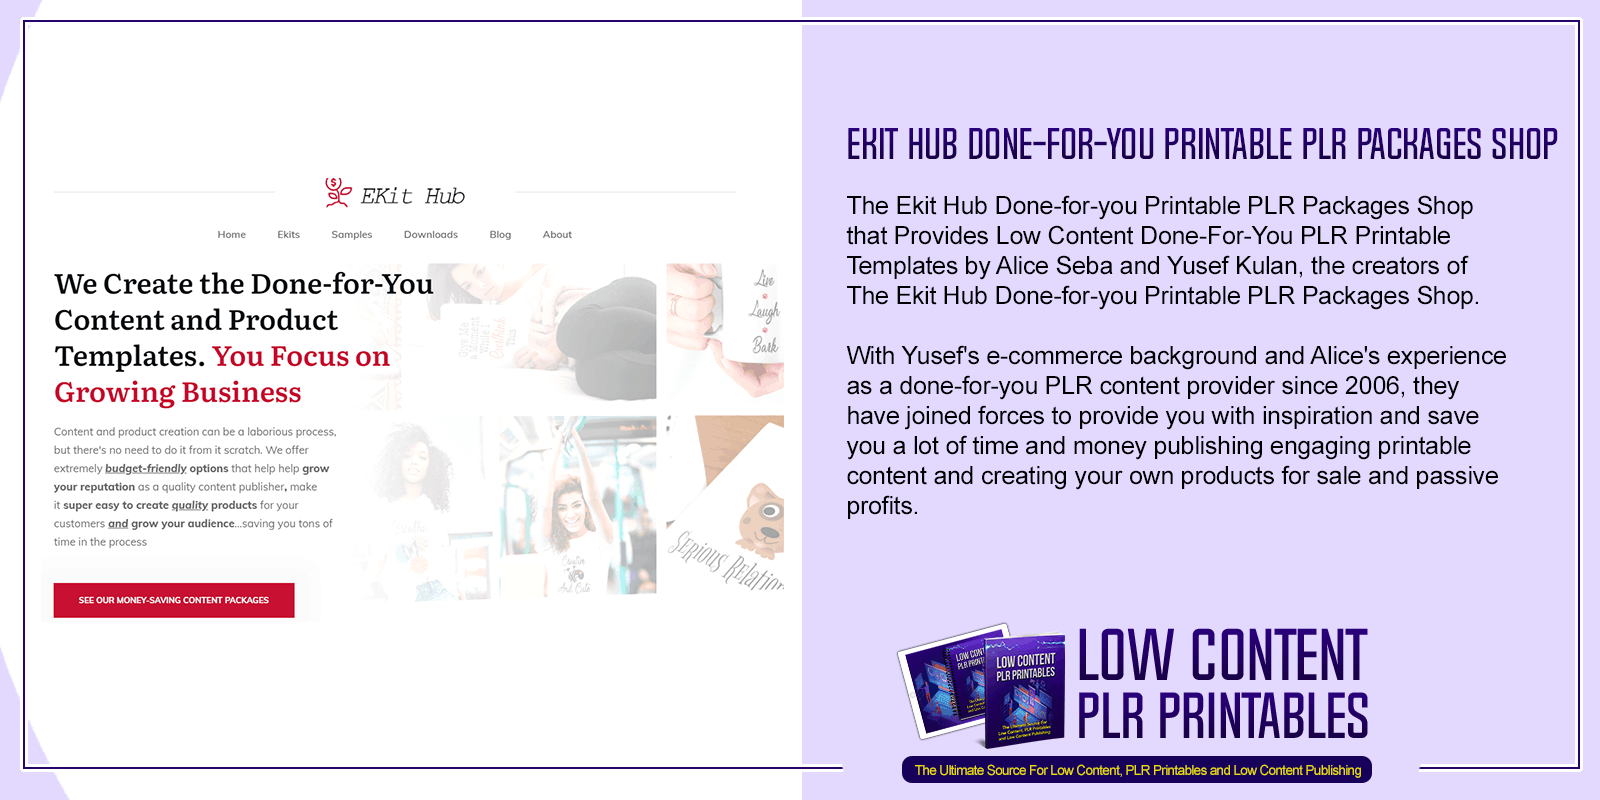 Ekit Hub Done for you Printable PLR Packages Shop